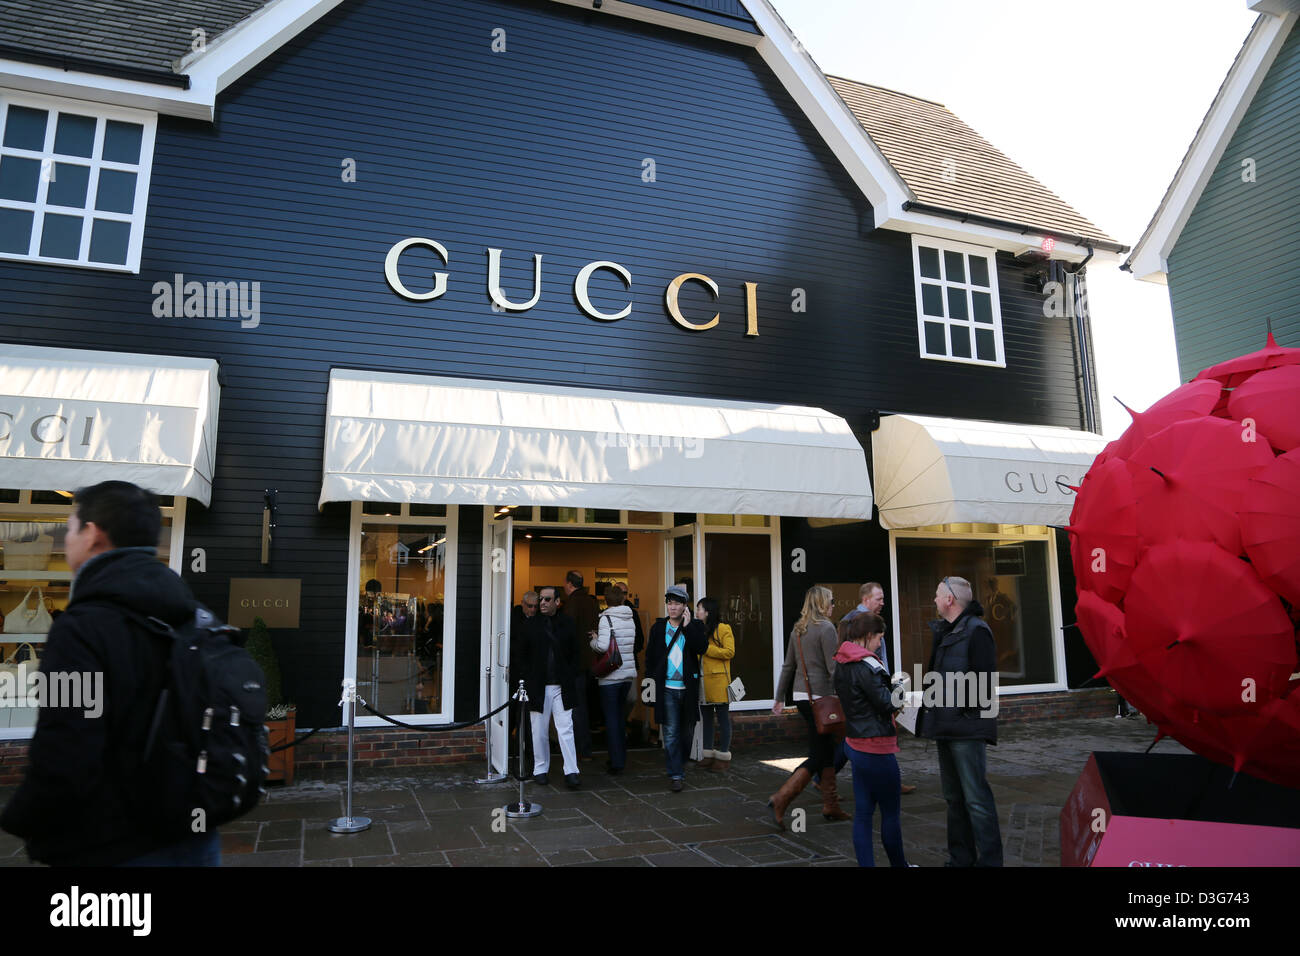 gucci bicester village contact number